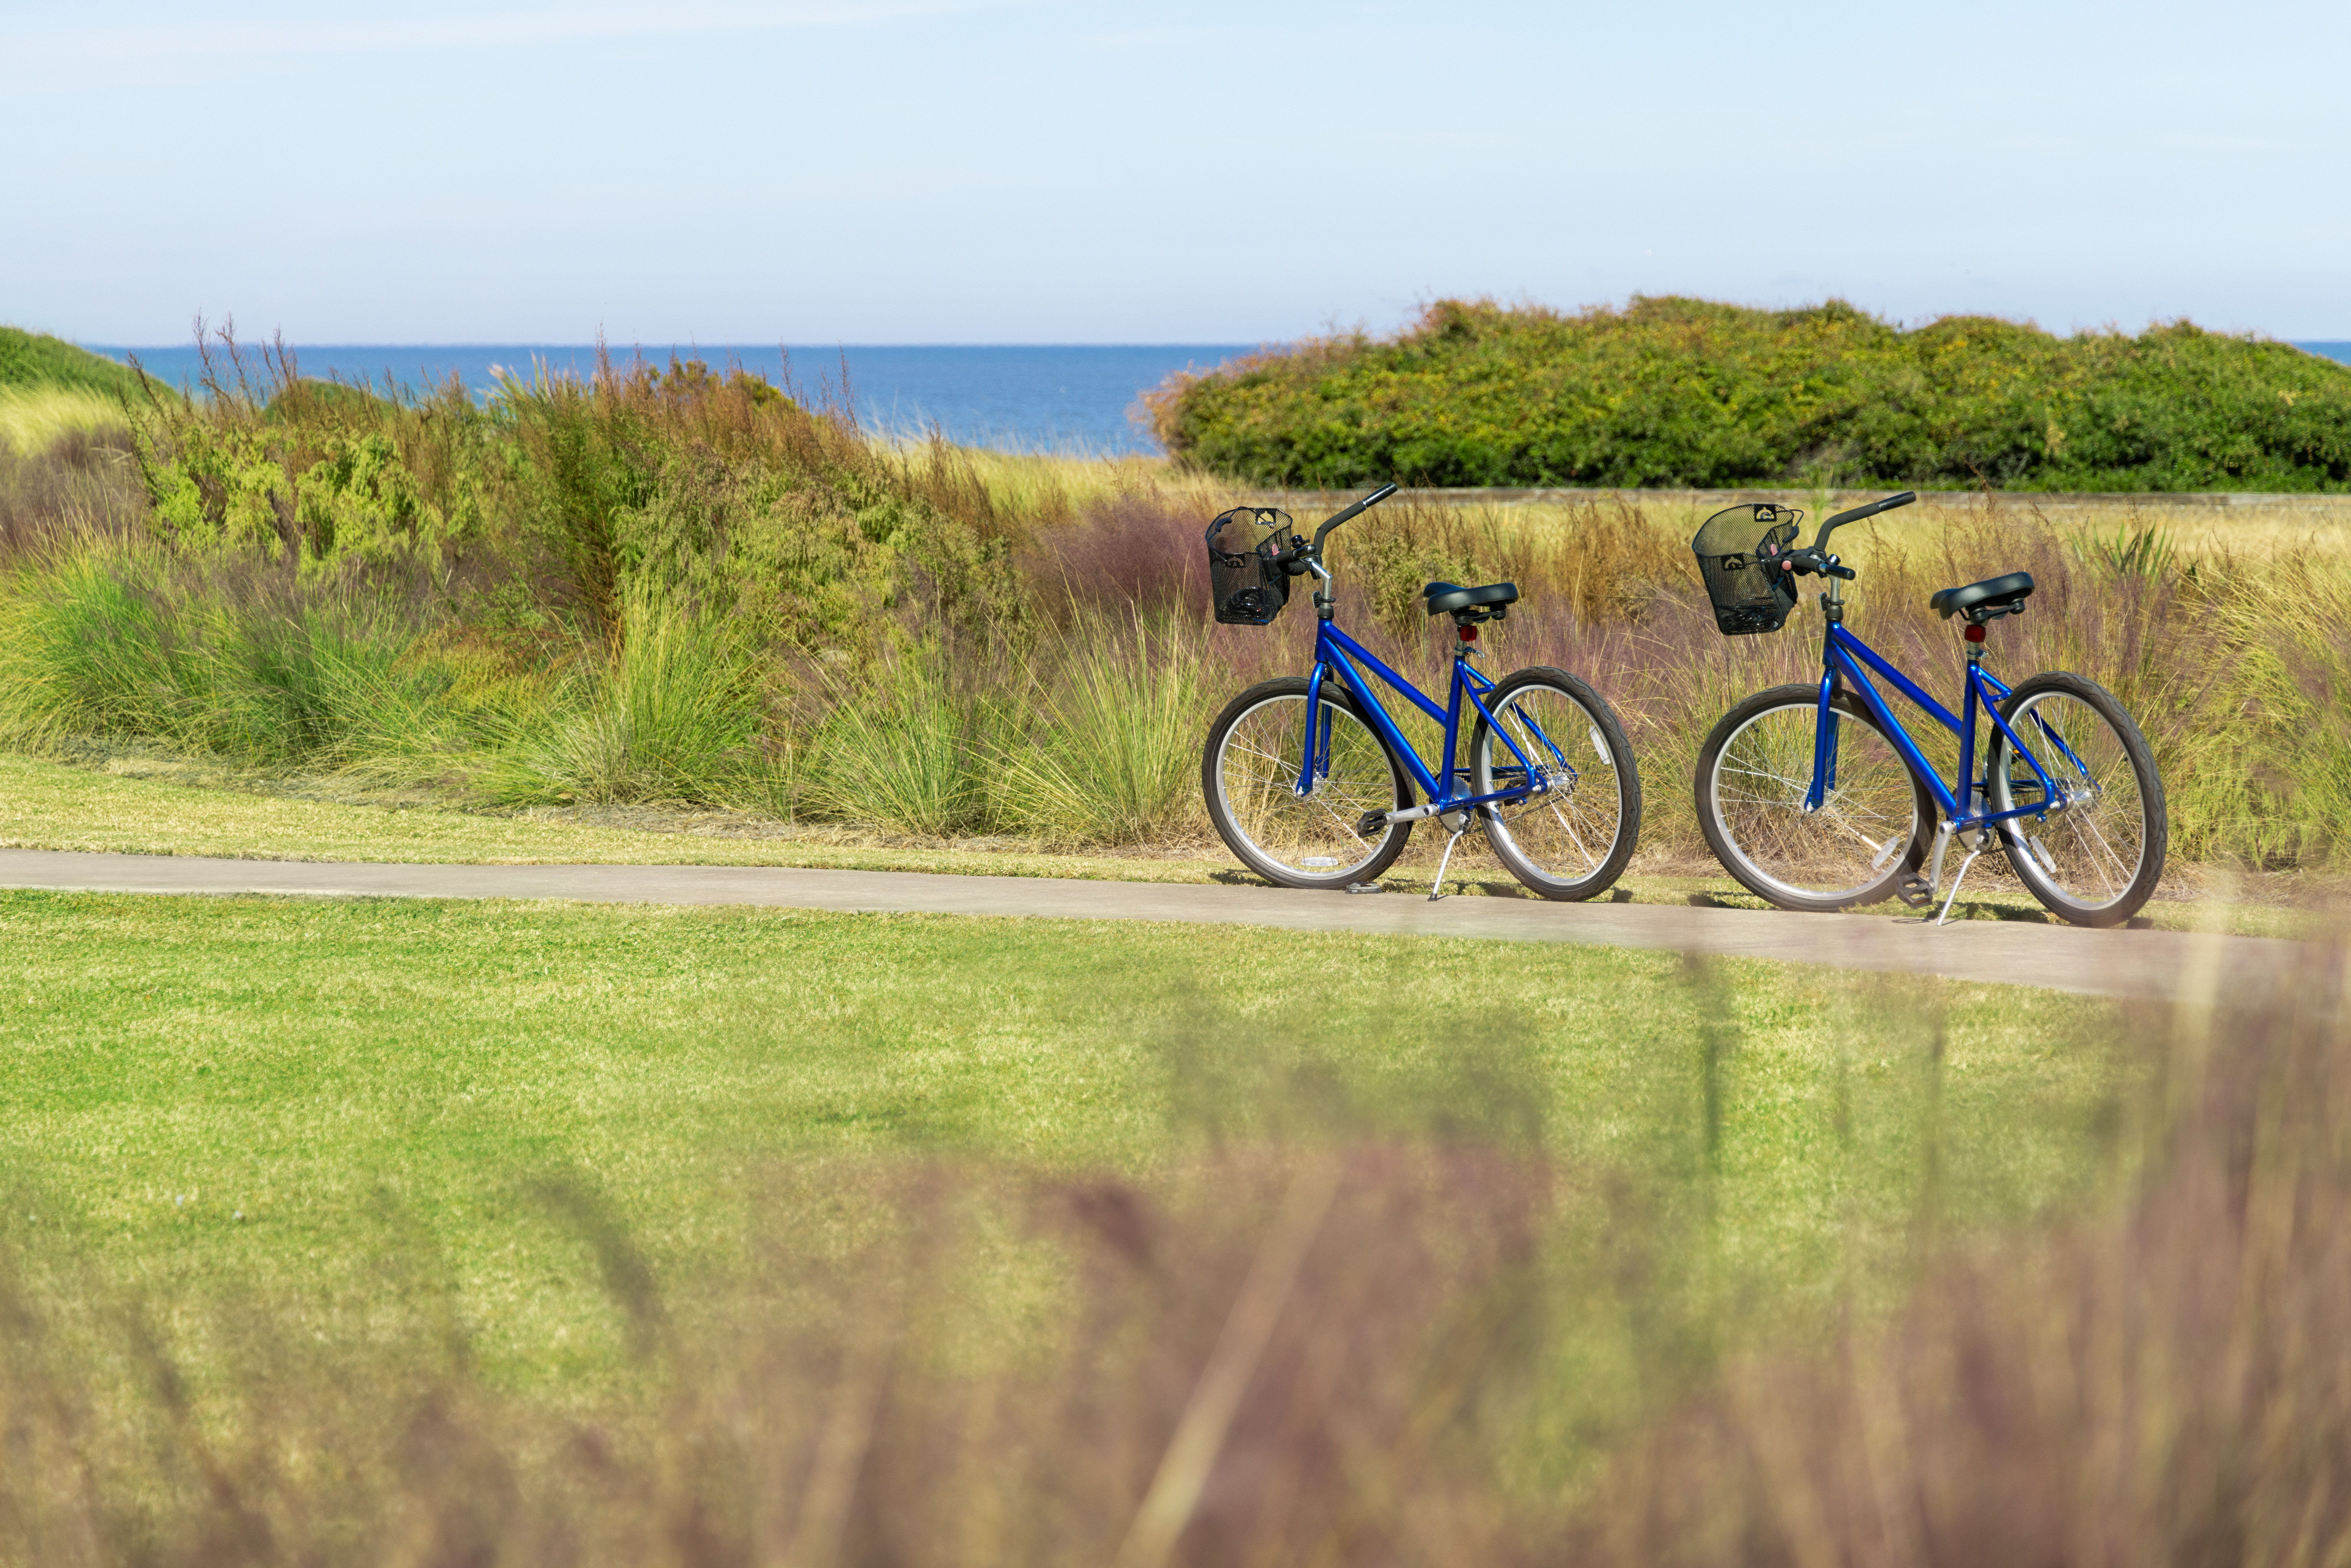 Guests will enjoy onsite bike rentals to explore the island!